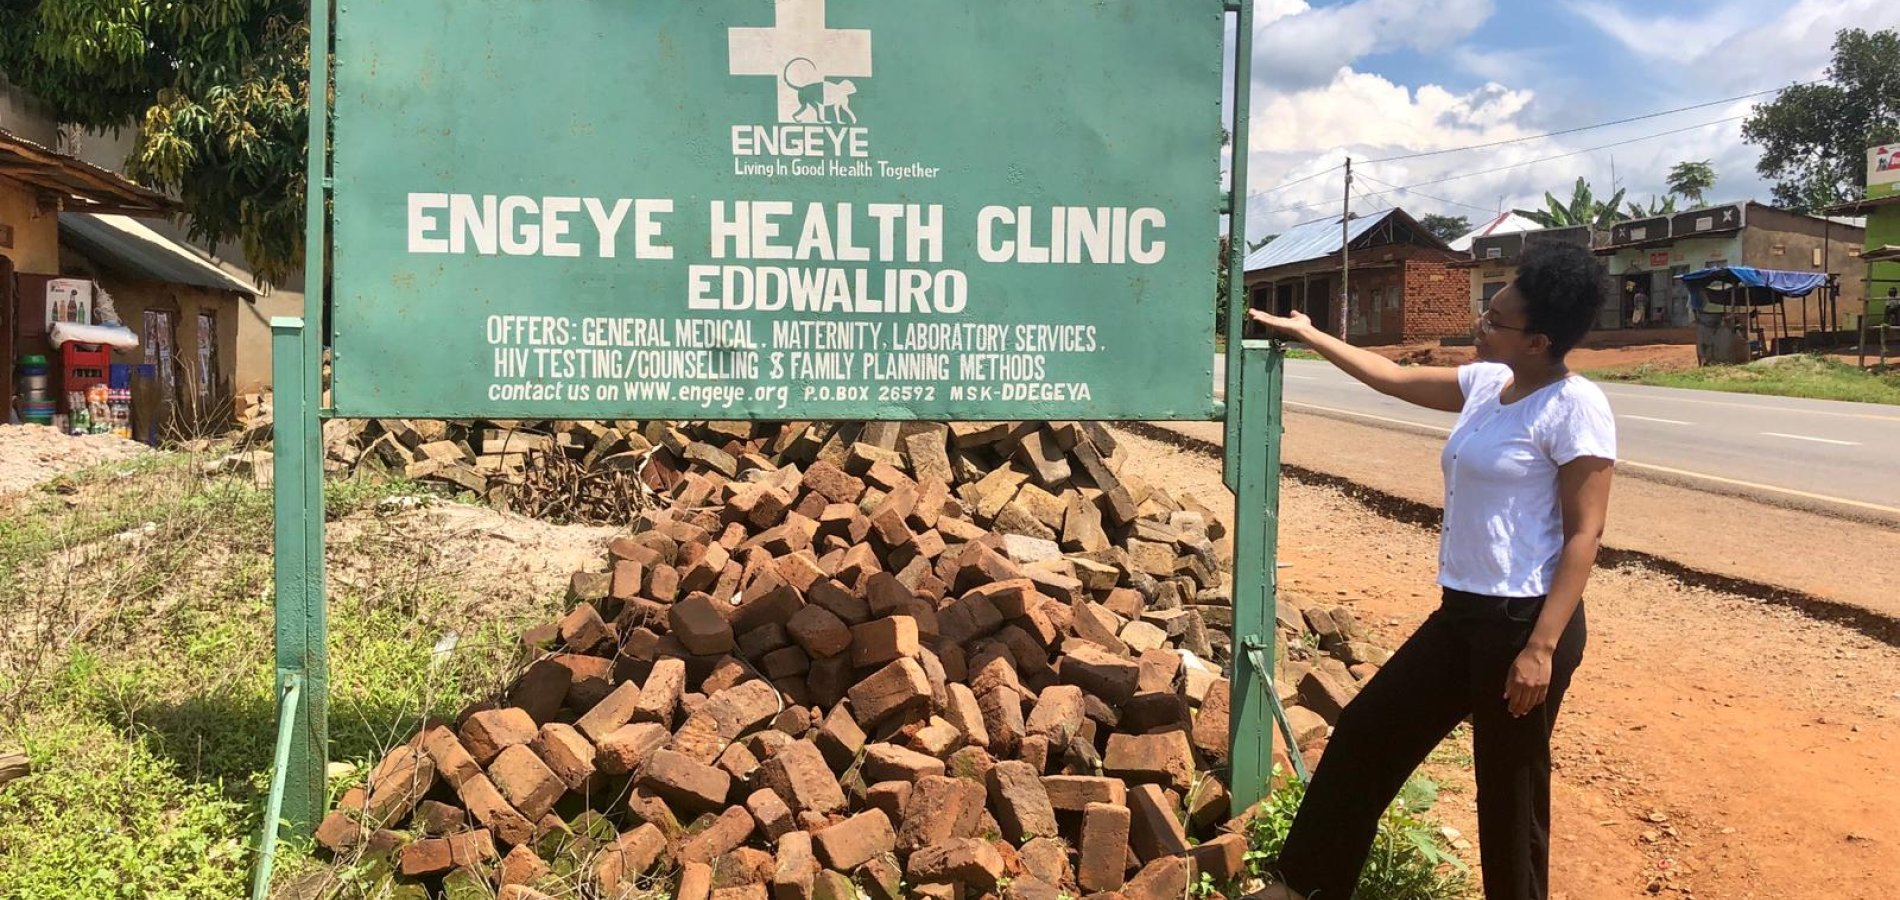 Elizabeth S. stands next to a green sign in Uganda that says "Engeye Health Clinic".